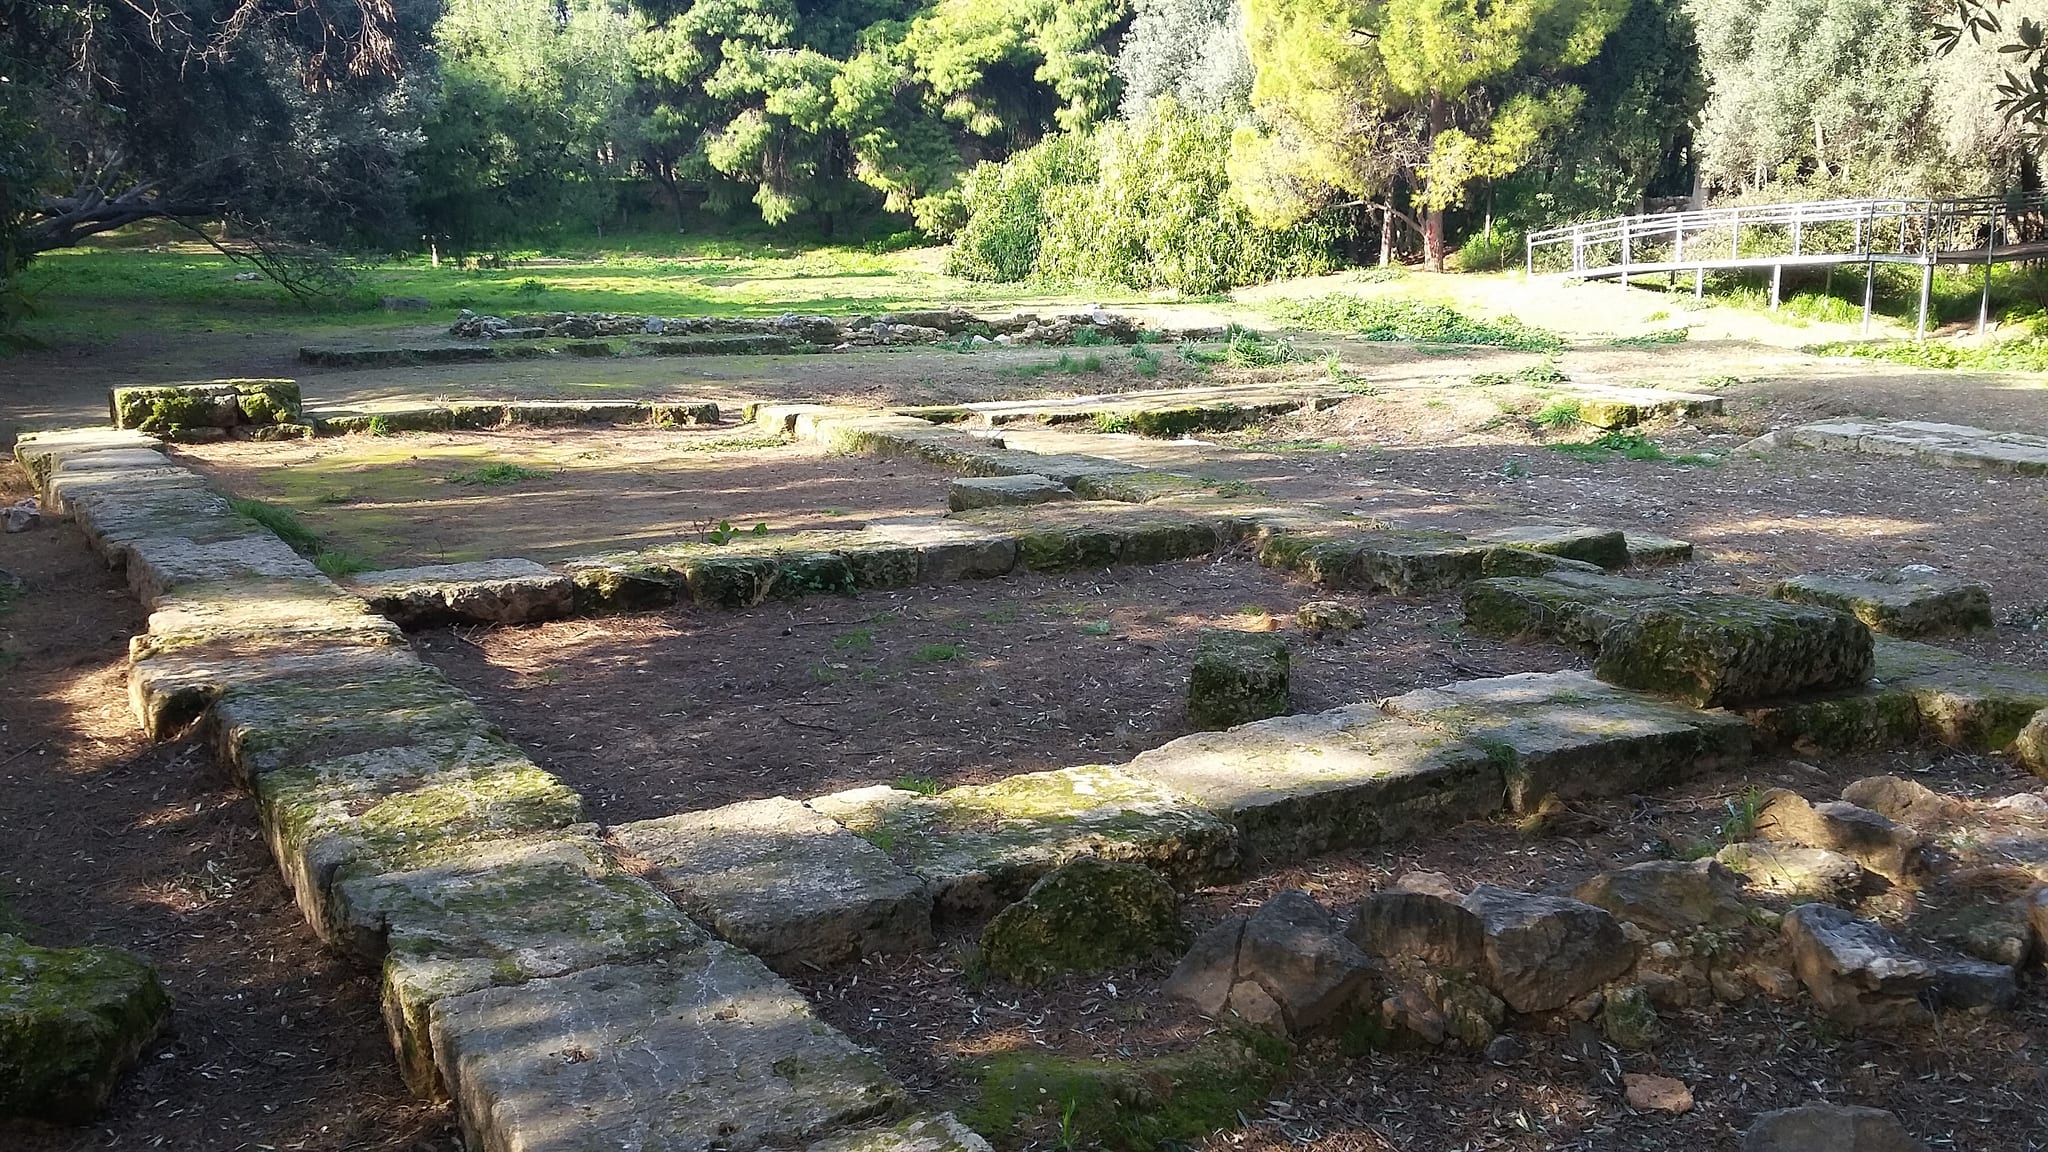  The image shows the ruins of Plato's Academy, the philosophical school founded by Plato in Athens around 387 BC.